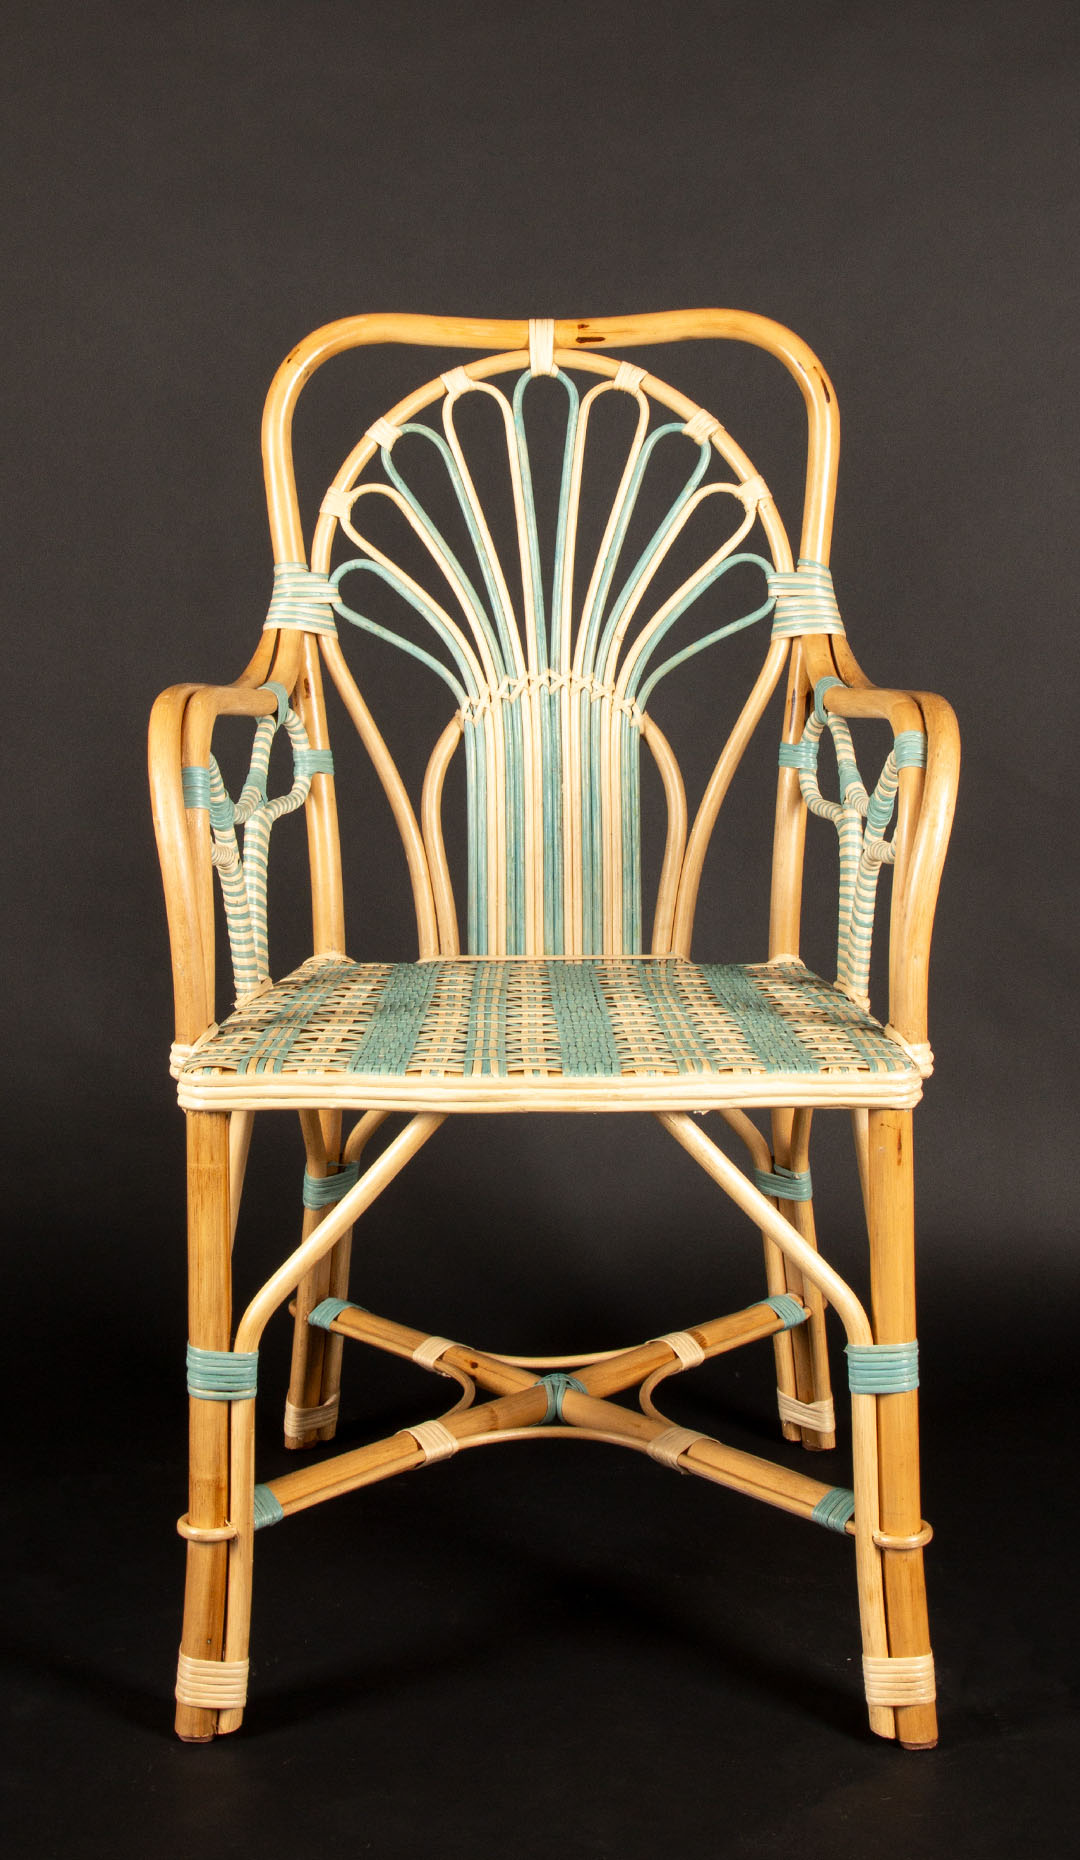 Blue Peacock Rattan Arm Chair by Creel and Gow